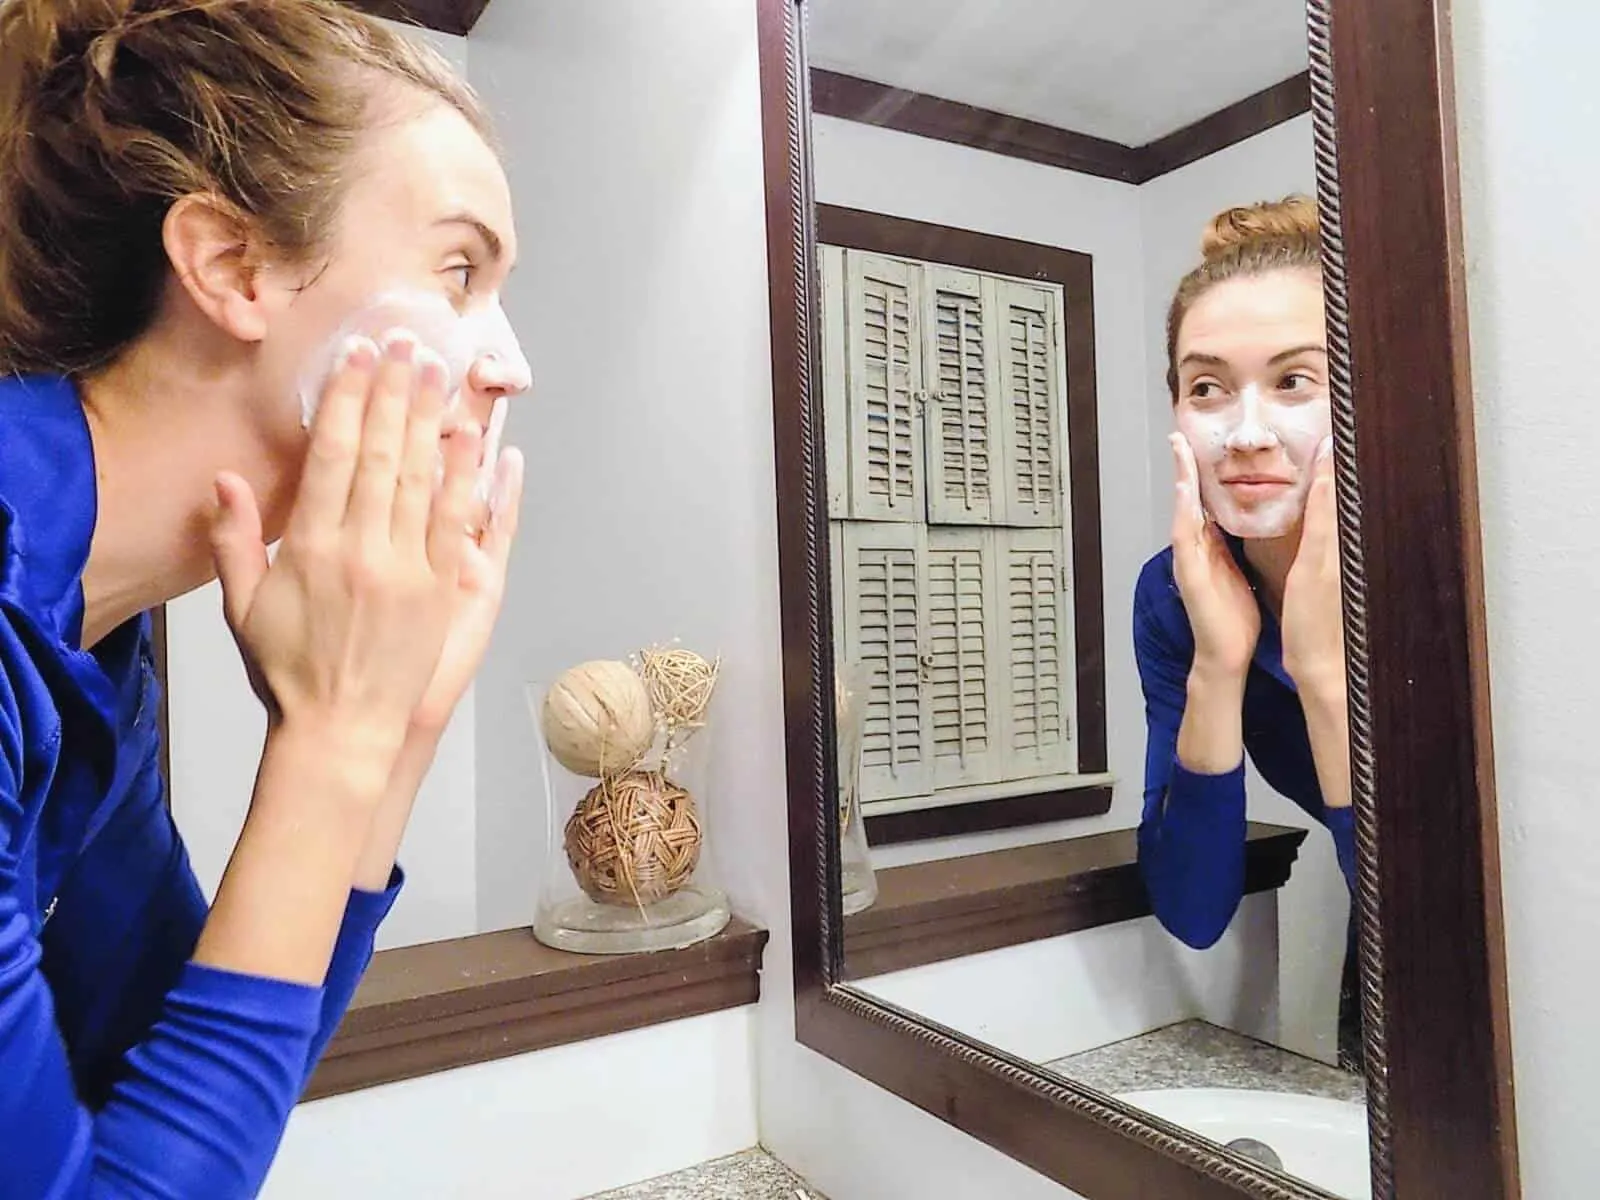 Woman washes face in mirror.